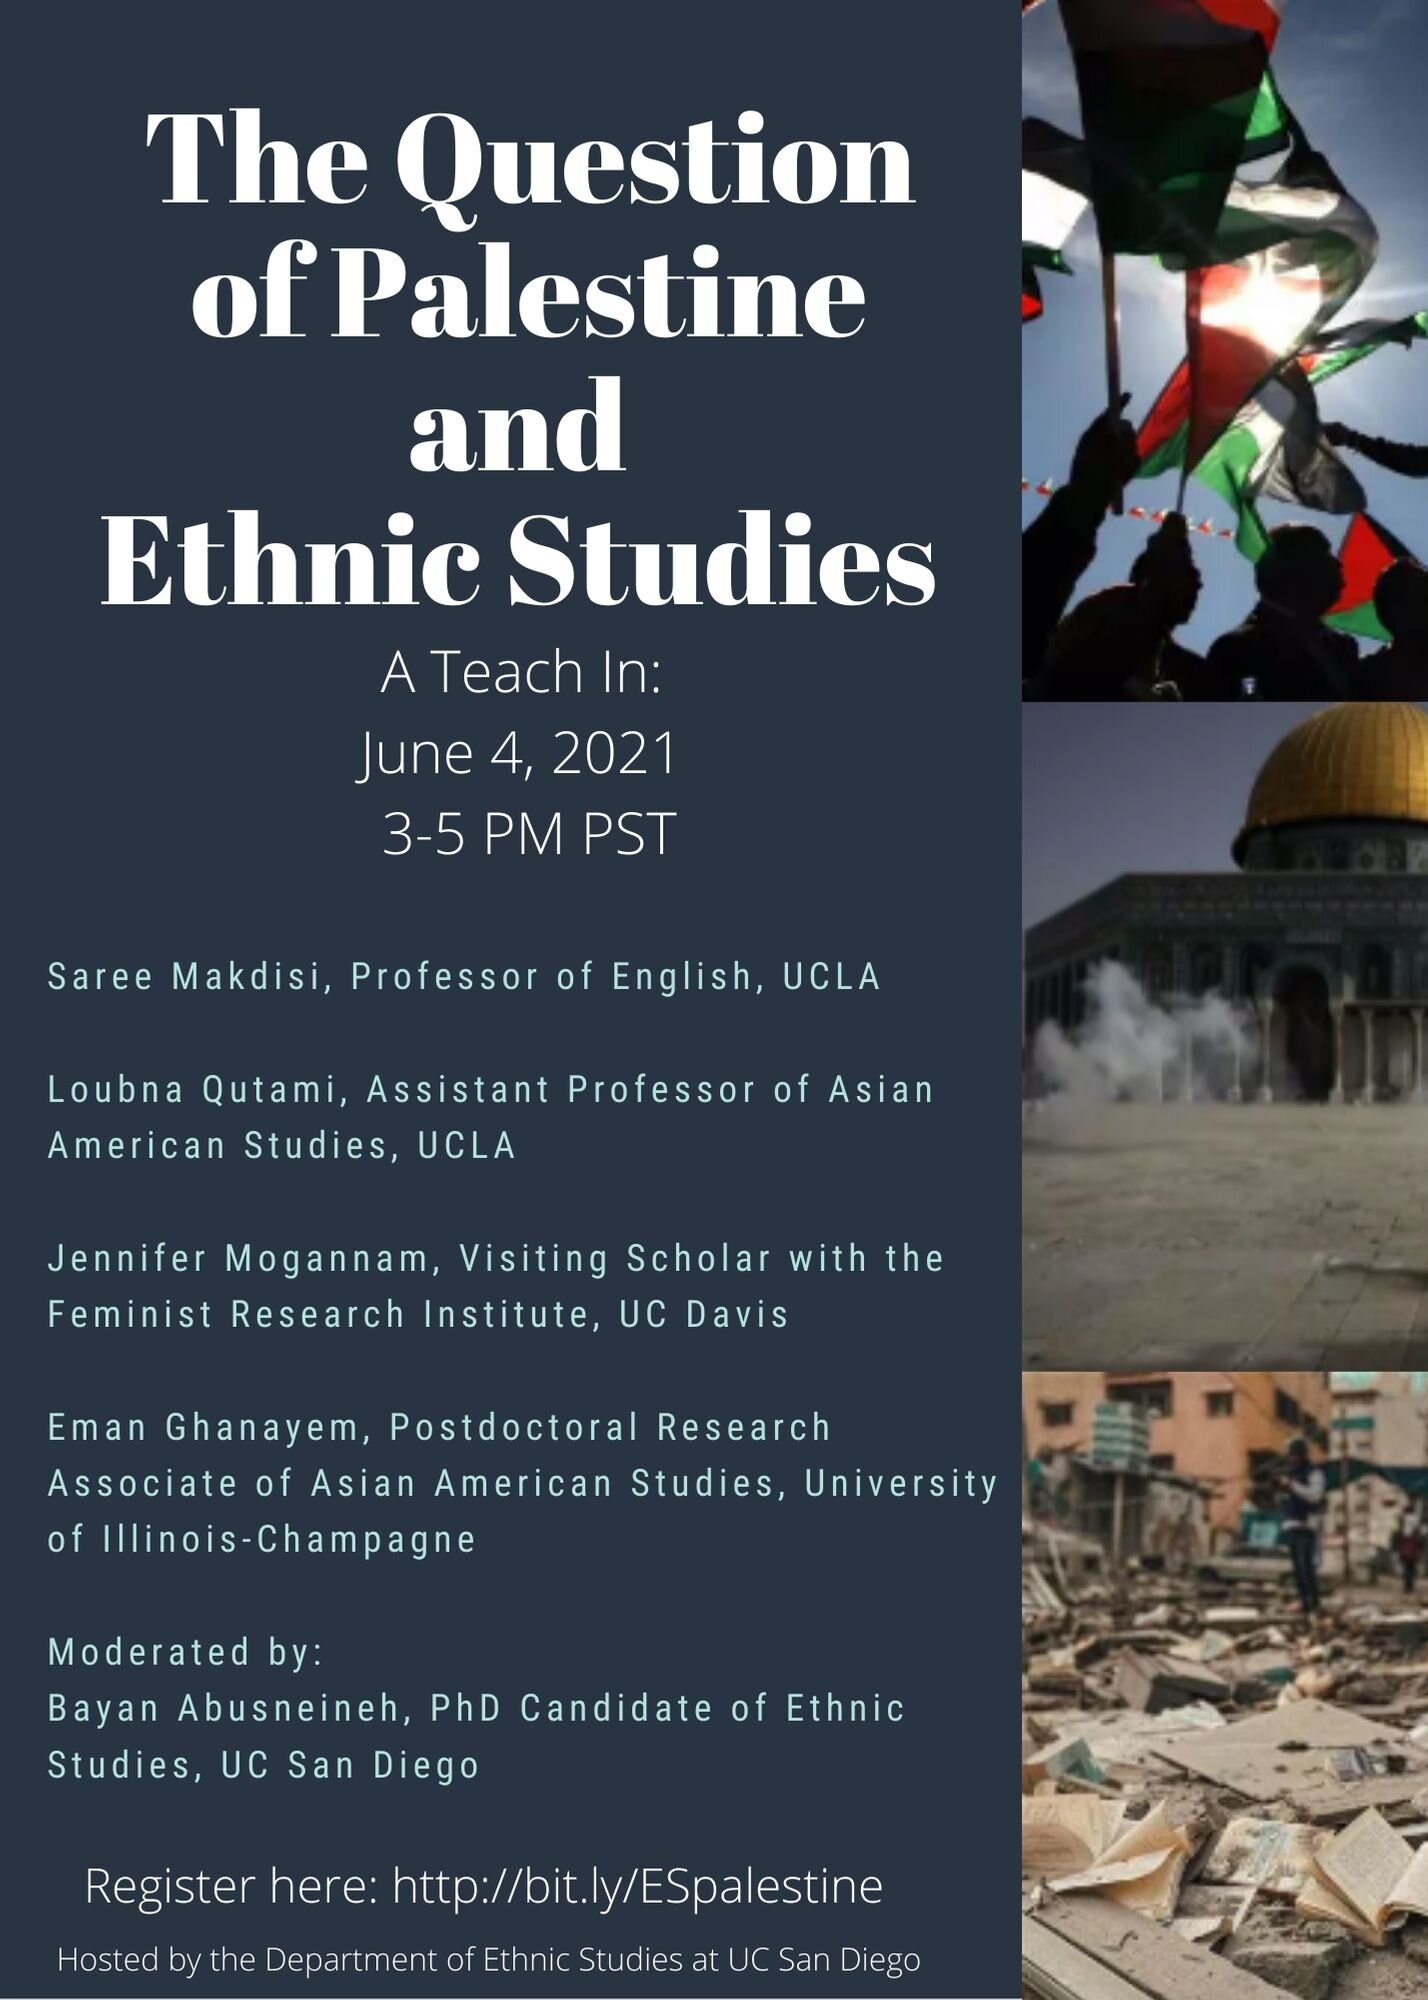 The Question of Palestine and Ethnic Studies - Teach in .jpg